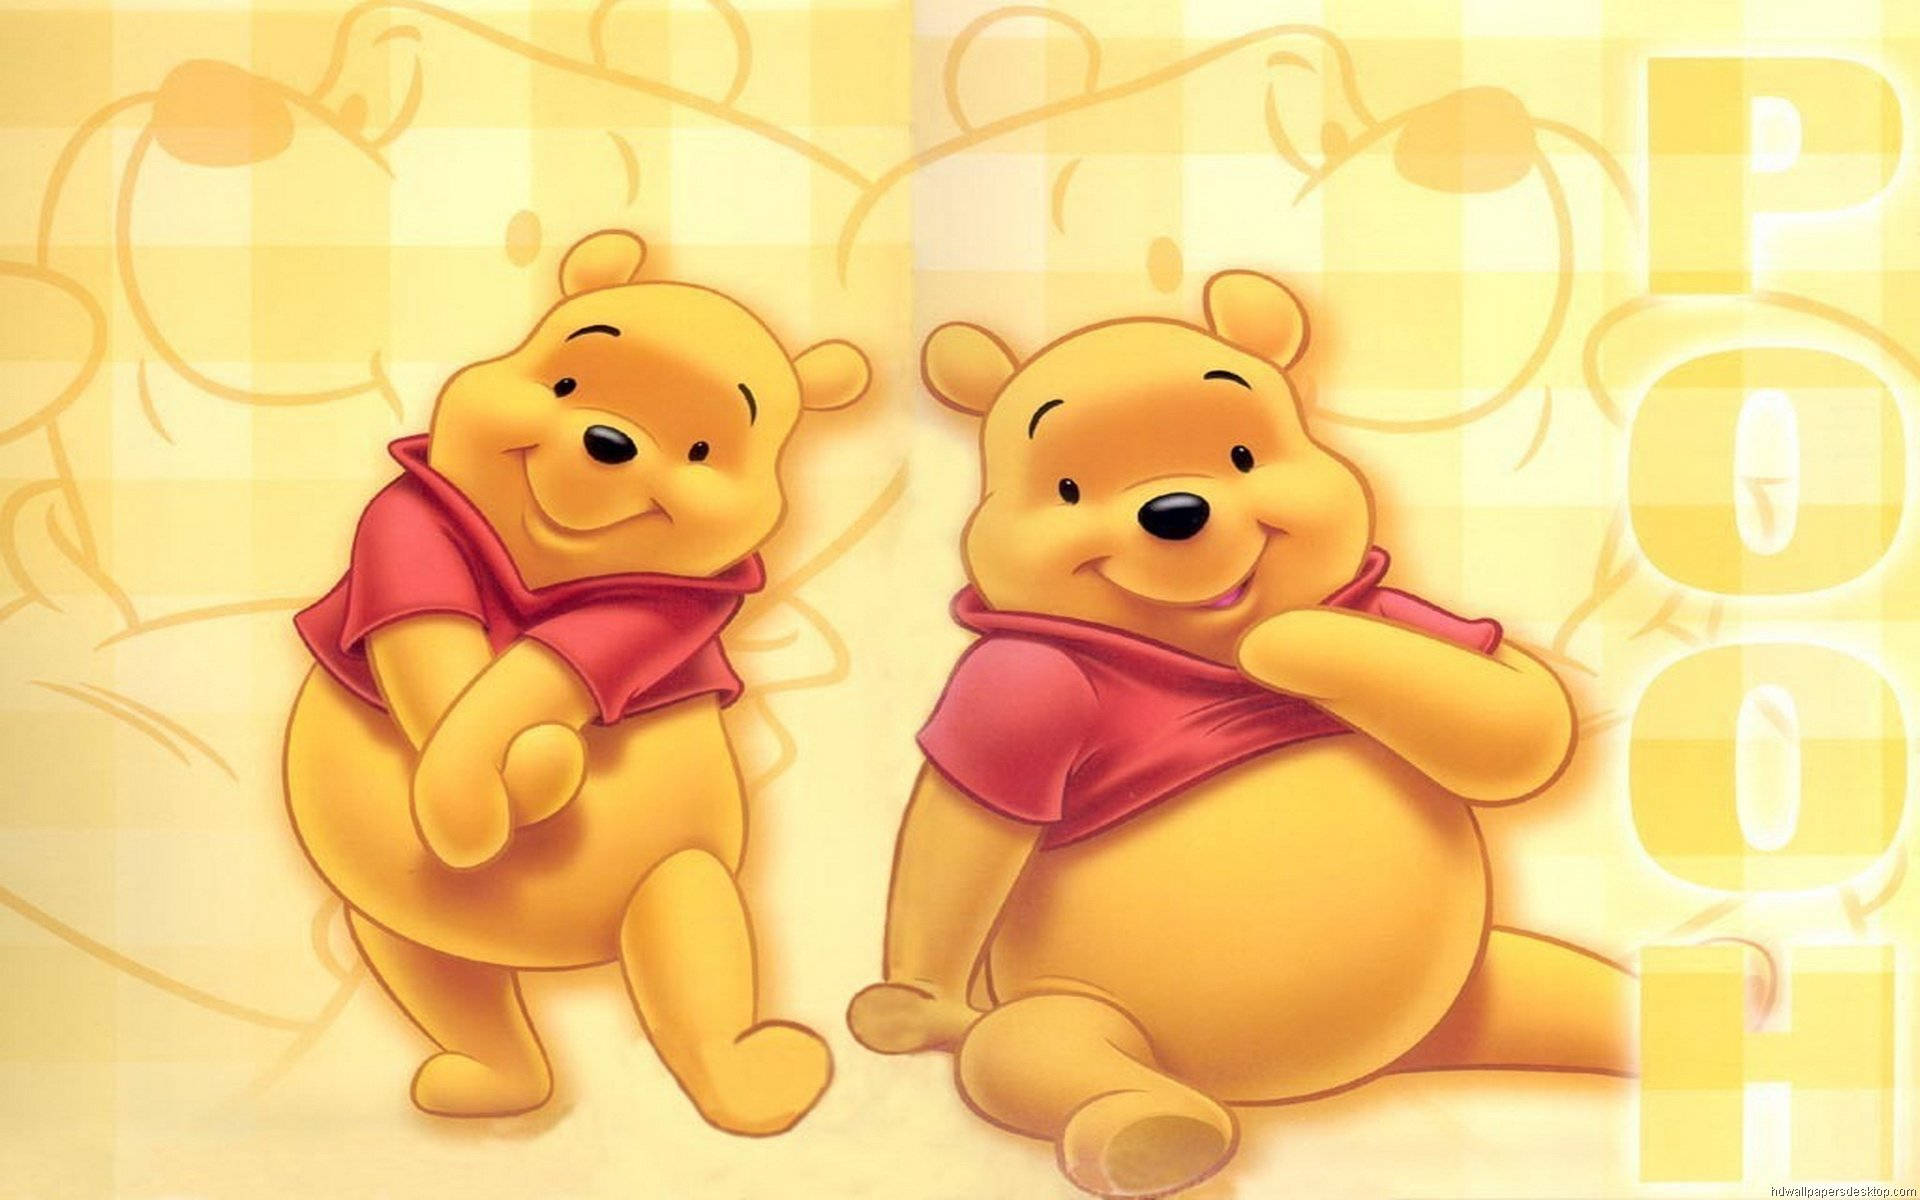 "The Best of Friends: Winnie The Pooh and His Twin Besr Friends" Wallpaper